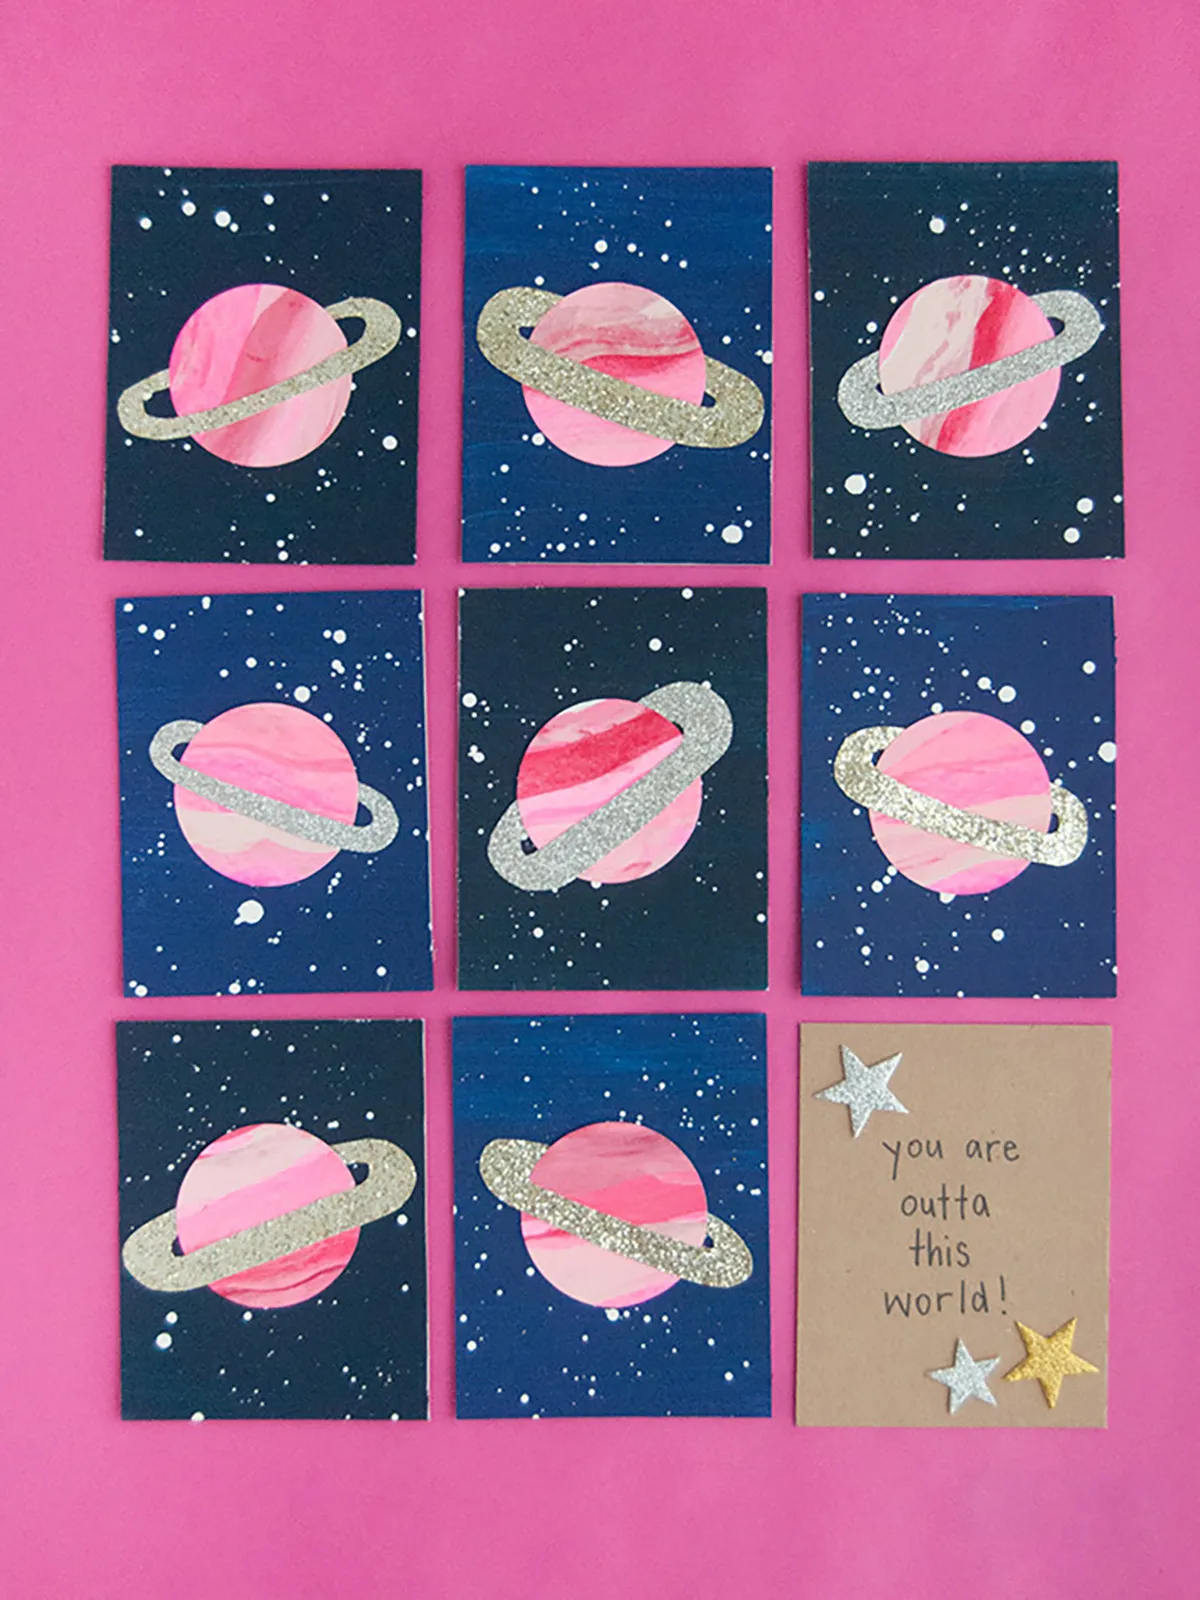 nine planet greetings cards - valentines crafts for kids